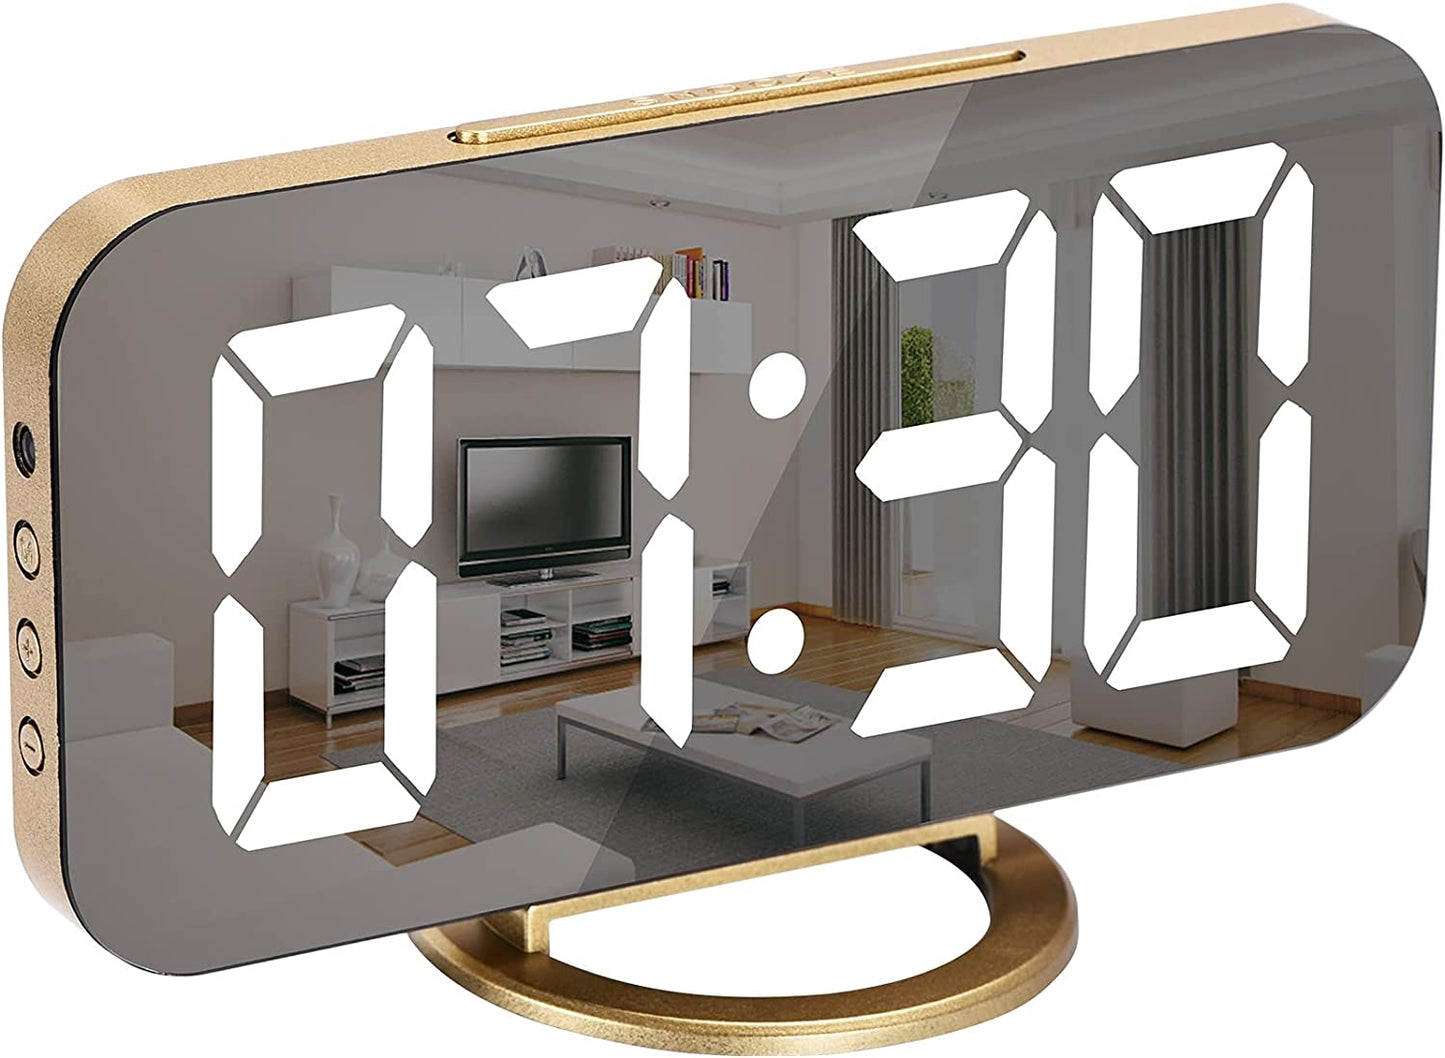 Large Digital Alarm Clock w/ LED and Mirror Dual USB Charger Ports 3 Levels